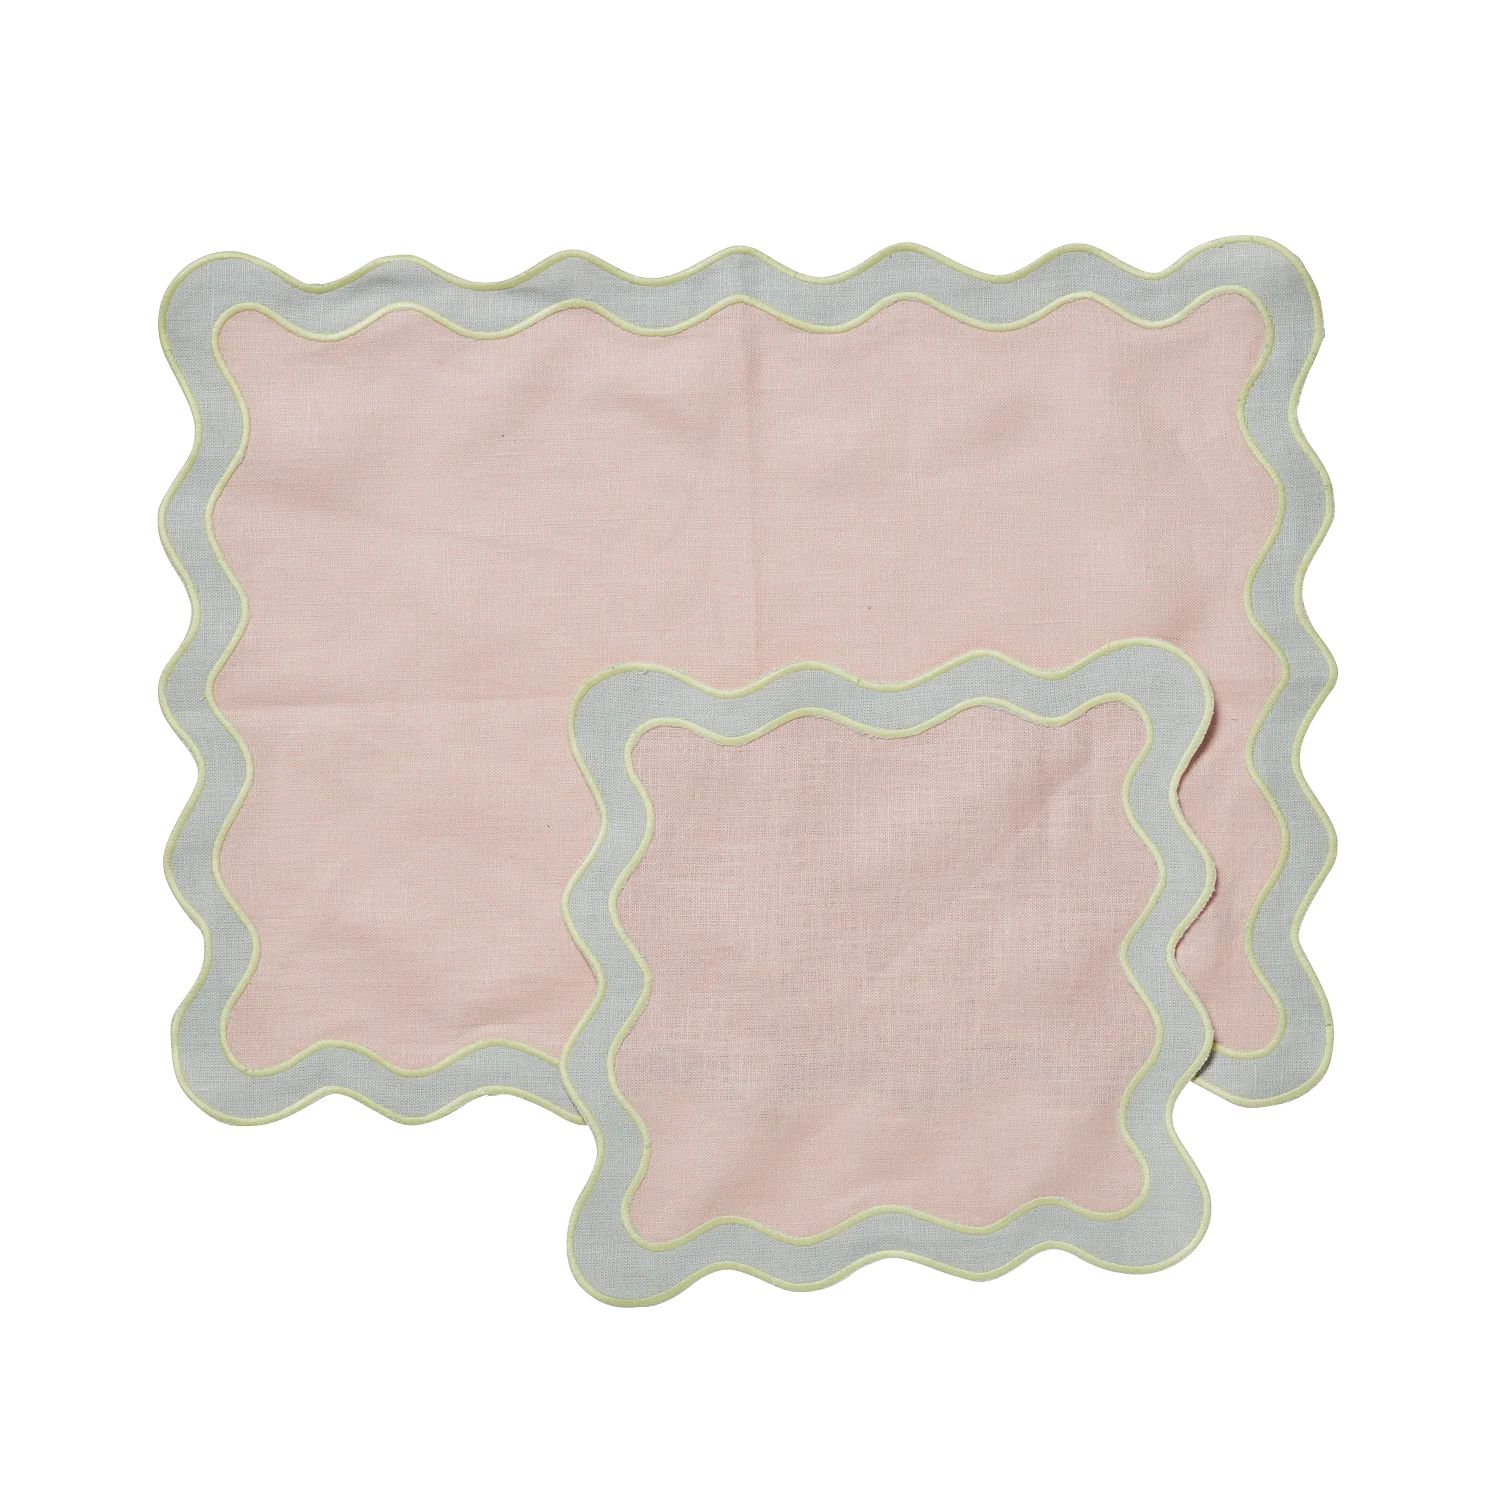 Set of 4 Placemats and Cocktail Napkins - Pale Pink and Seafoam | In the Roundhouse